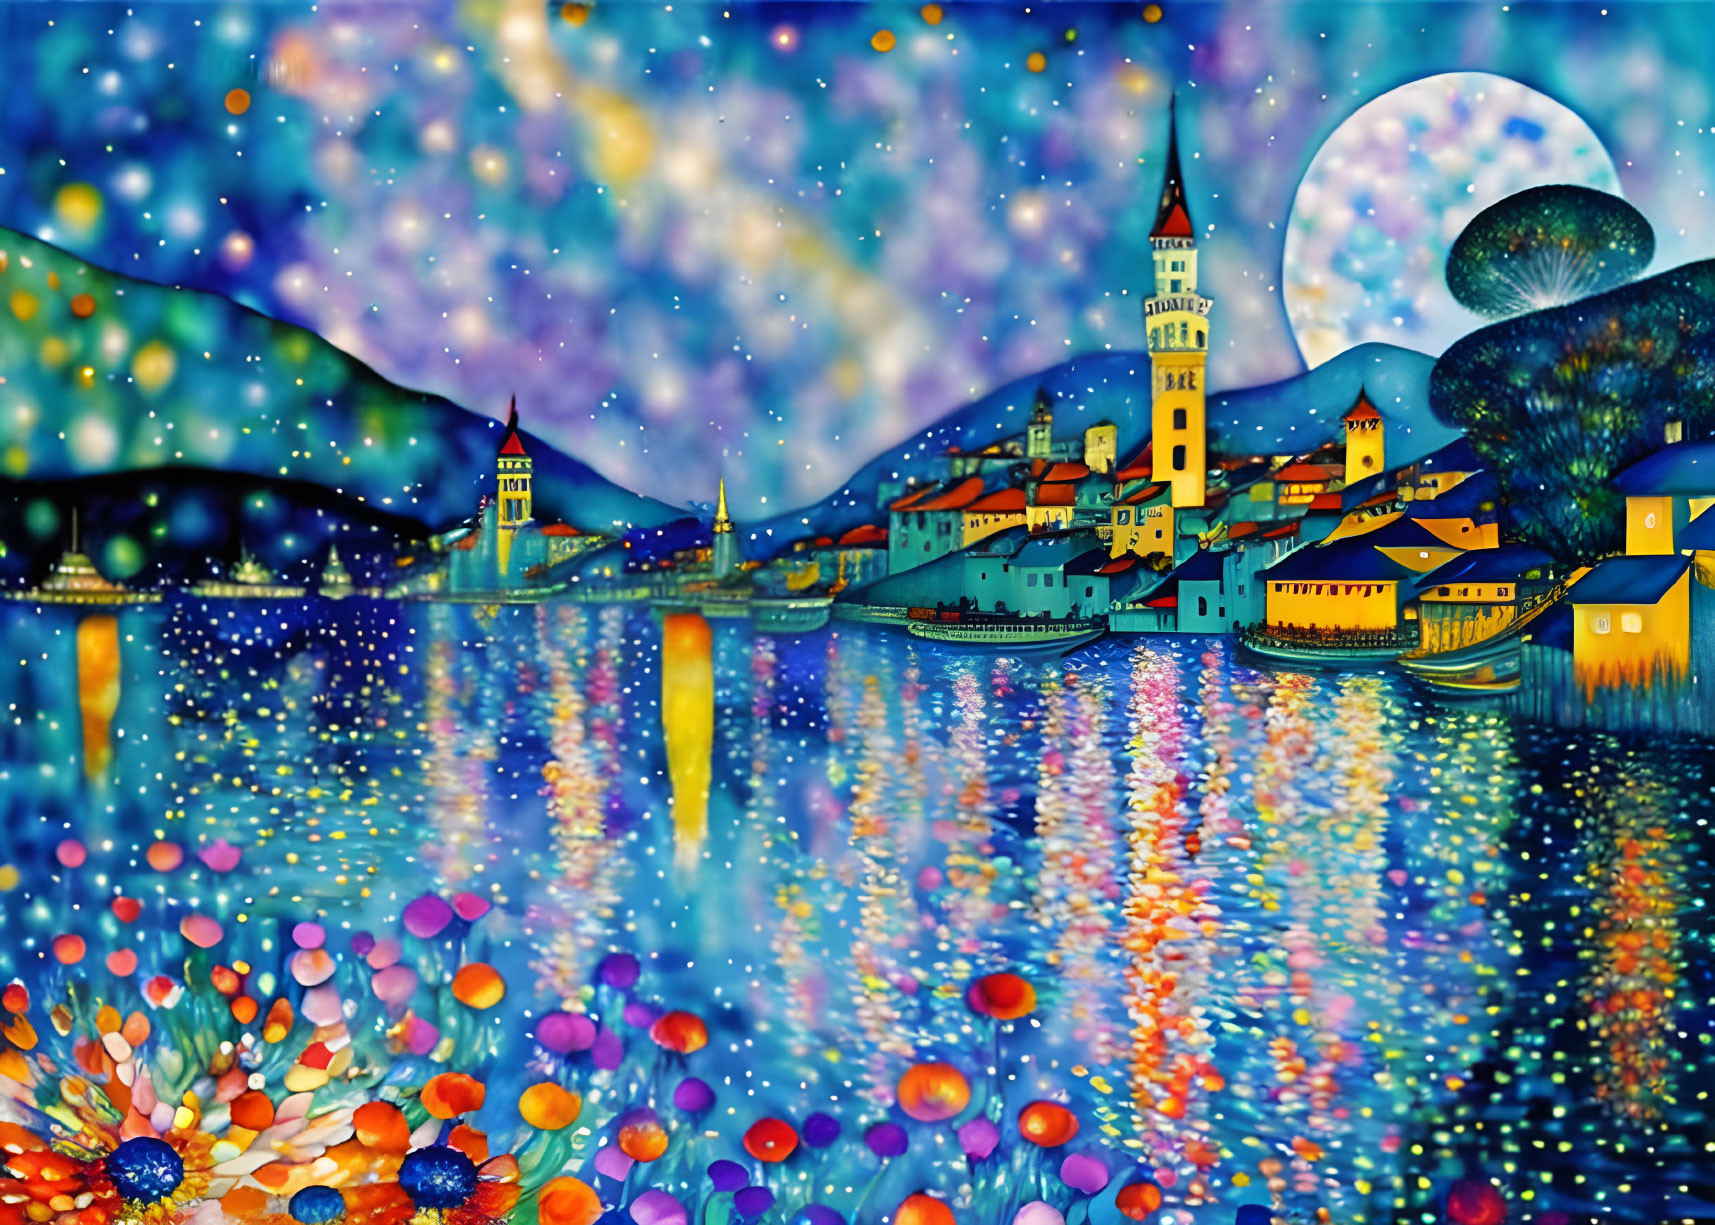 Colorful seaside town at night: vibrant buildings, starlit sky, glowing moon, floral sea